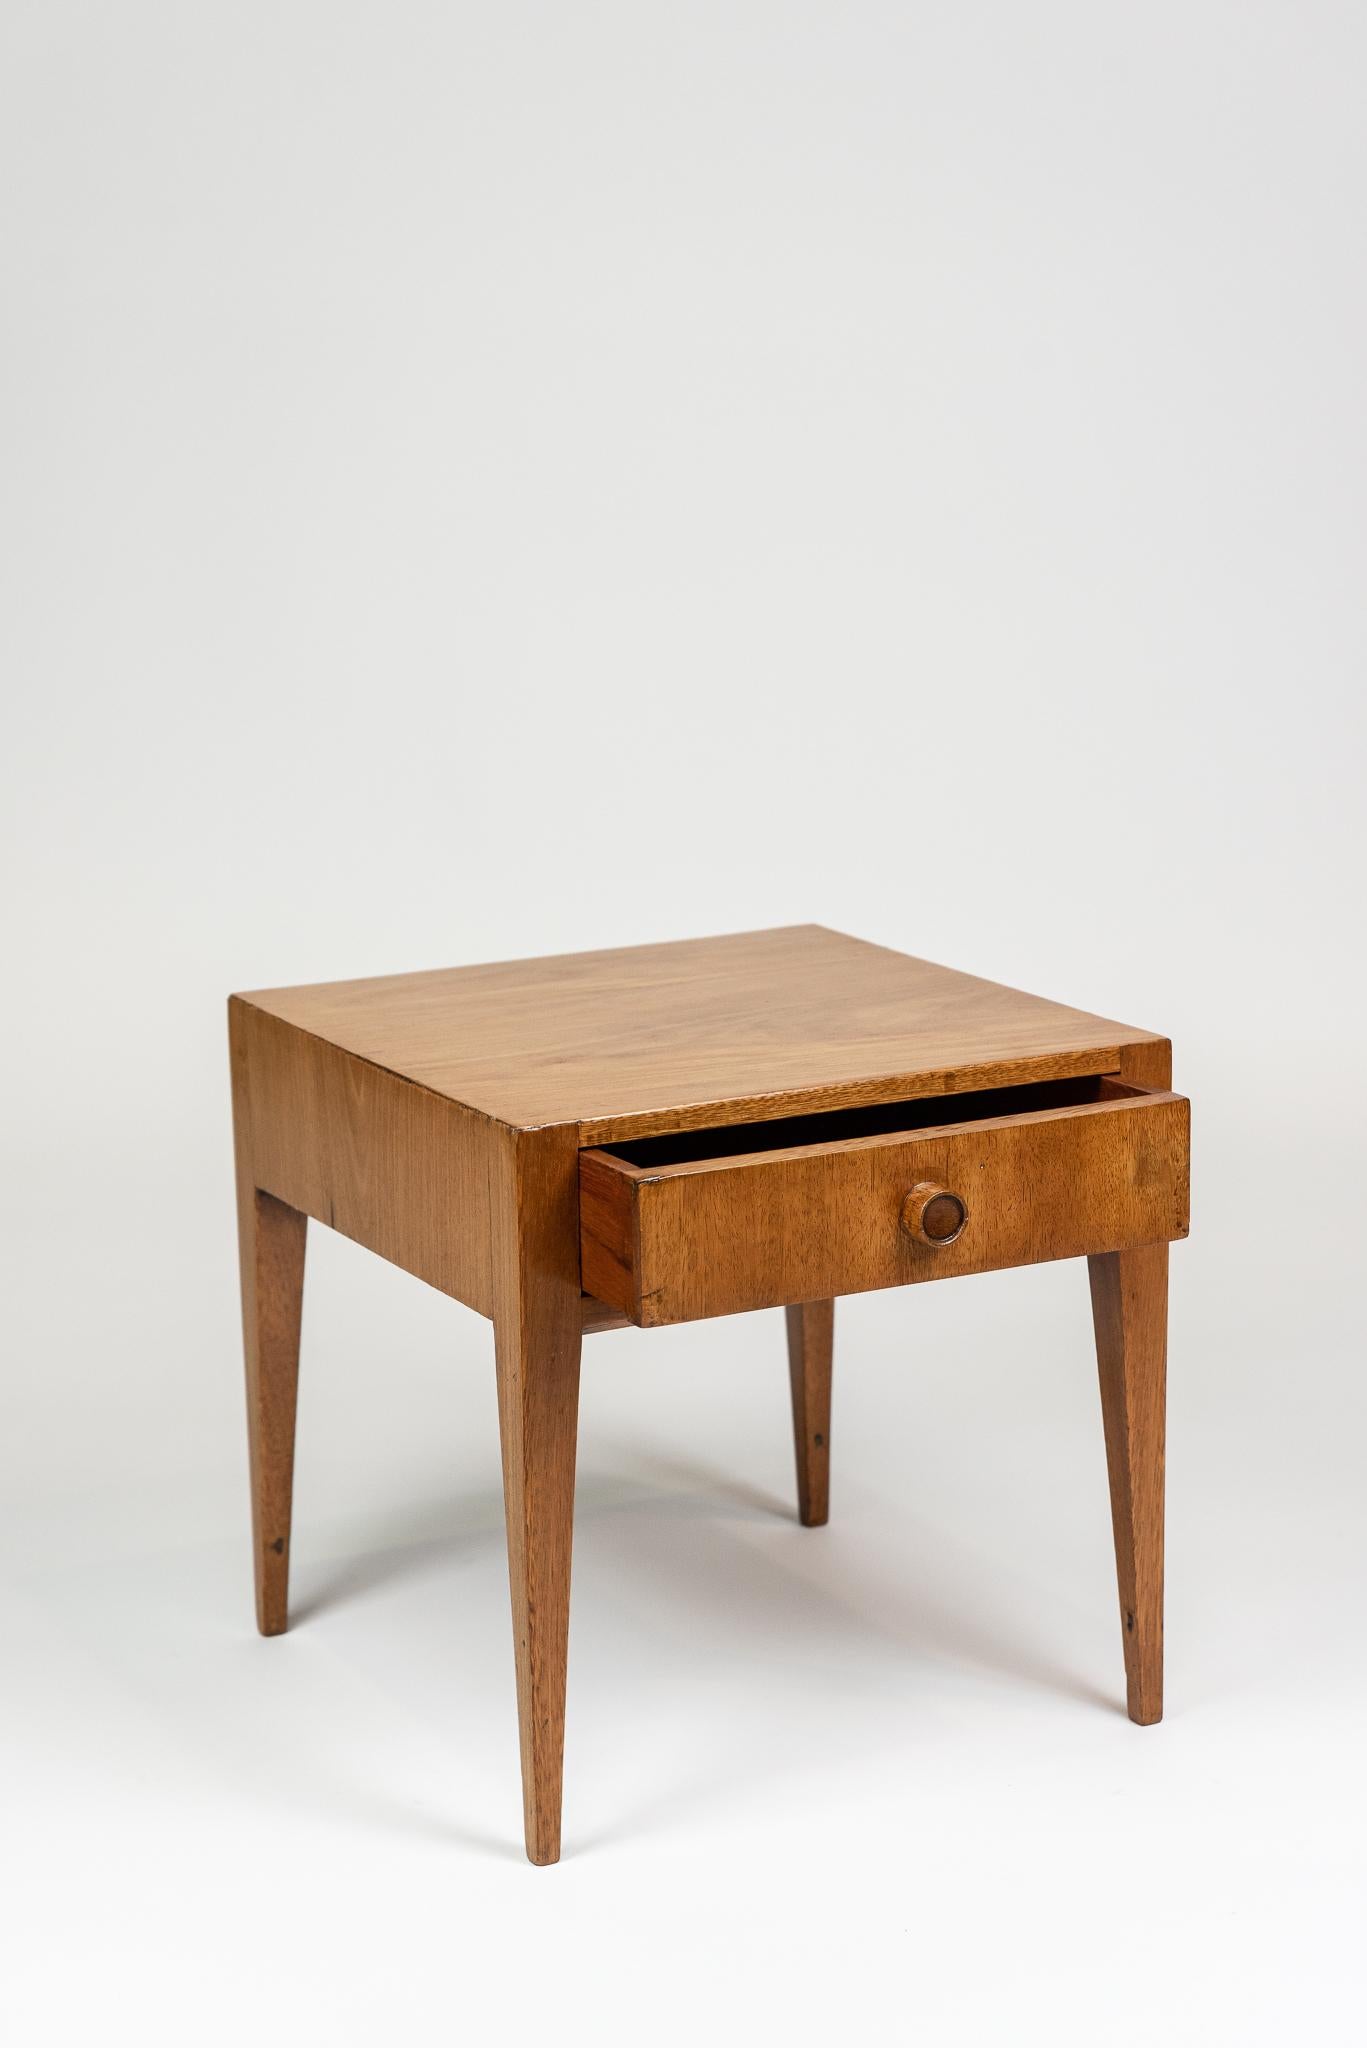 Hand-Crafted Joaquim Tenreiro, Bedside Table, 1947 For Sale